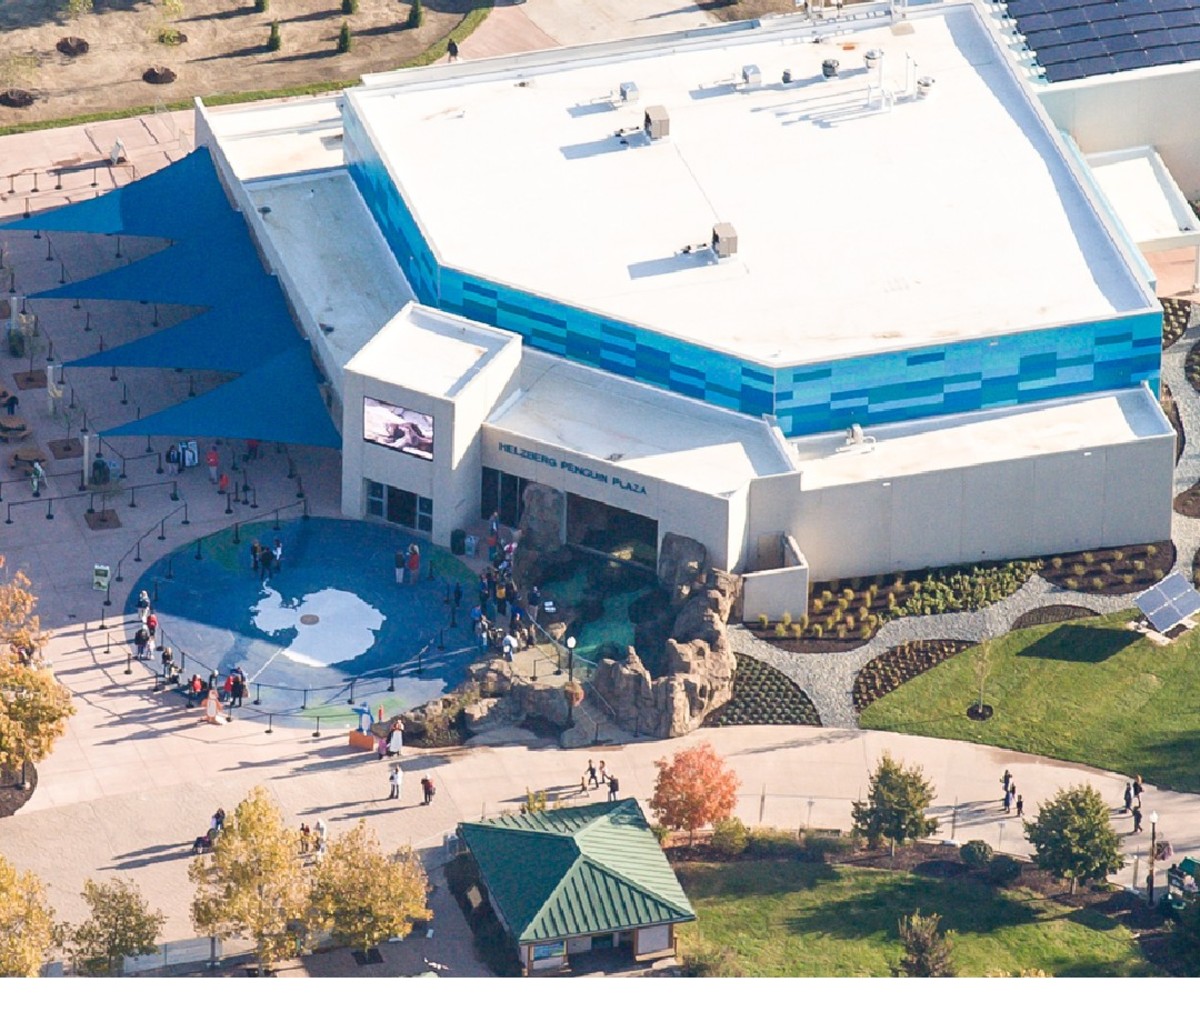 Aerial view of Kansas City Zoo, host of Party for the Planet: Kansas City, MO